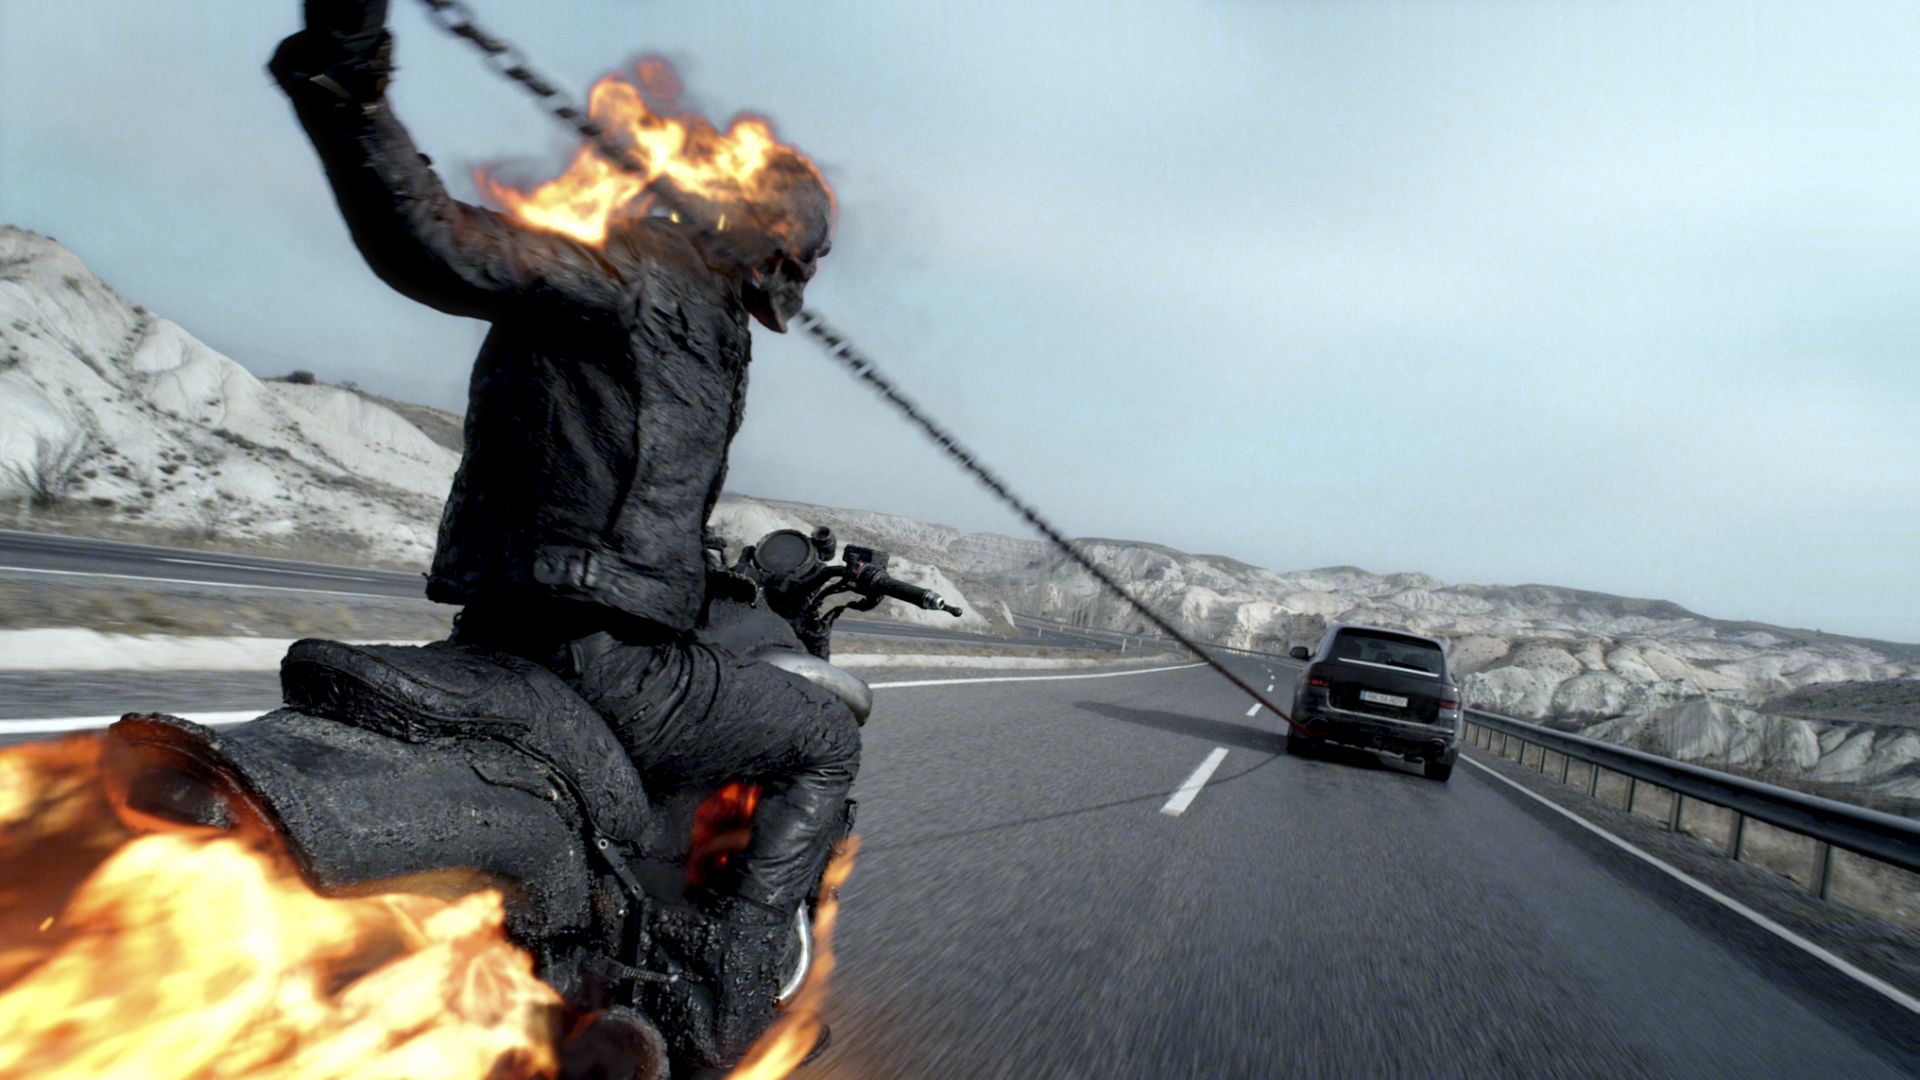 ghost rider 2 others hd wallpaper wallpapers55com   Best Wallpapers